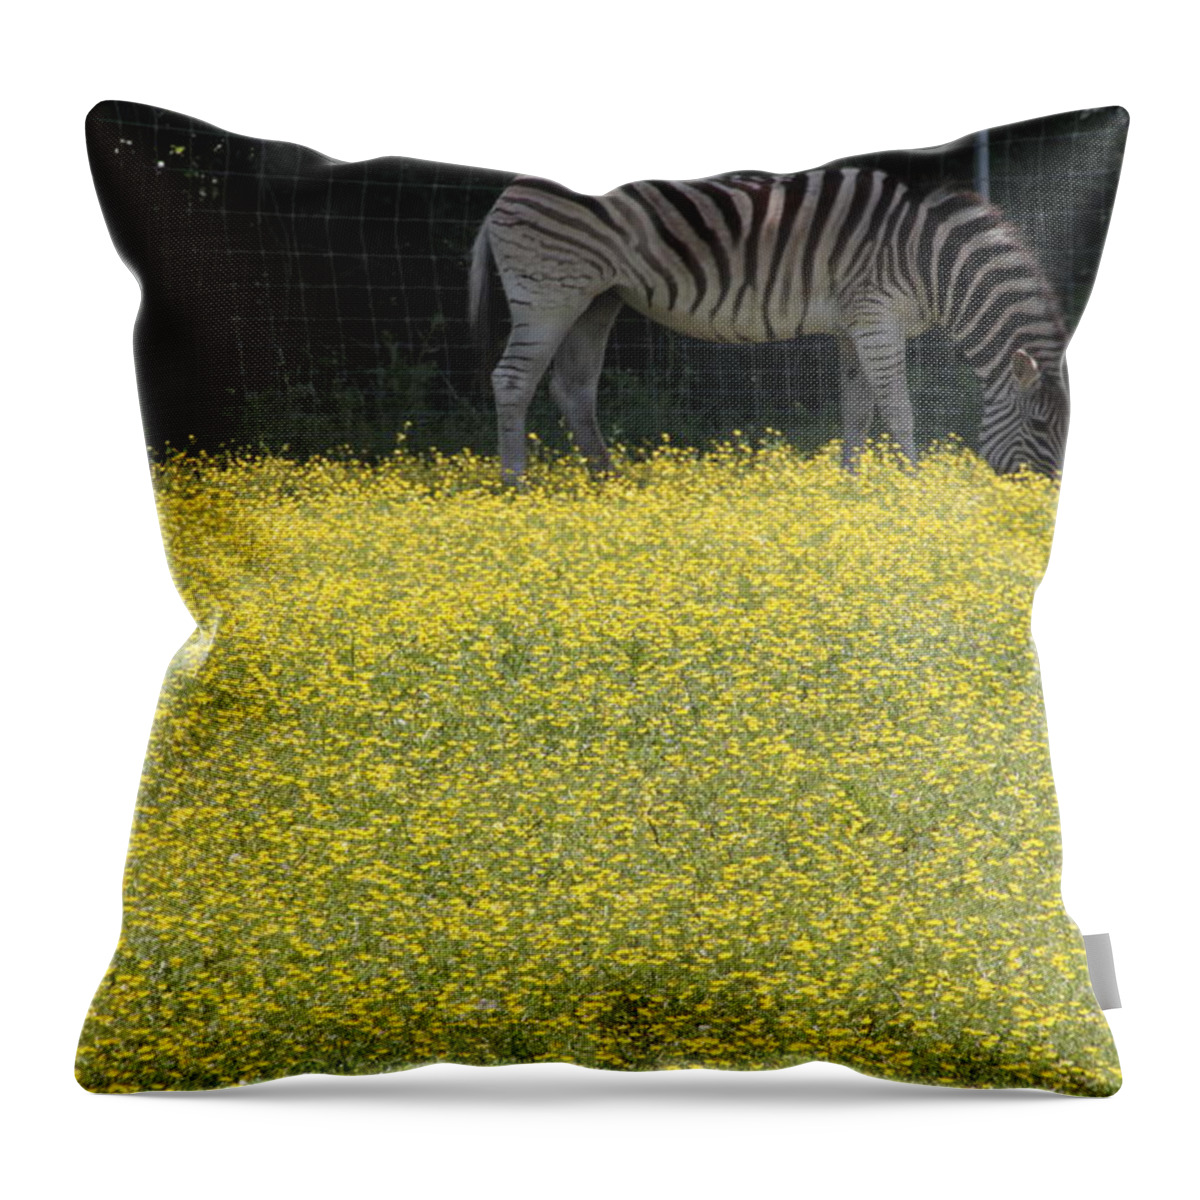 Horizontal Photograph Throw Pillow featuring the photograph Grazing Zebra Nashville Zoo by Valerie Collins